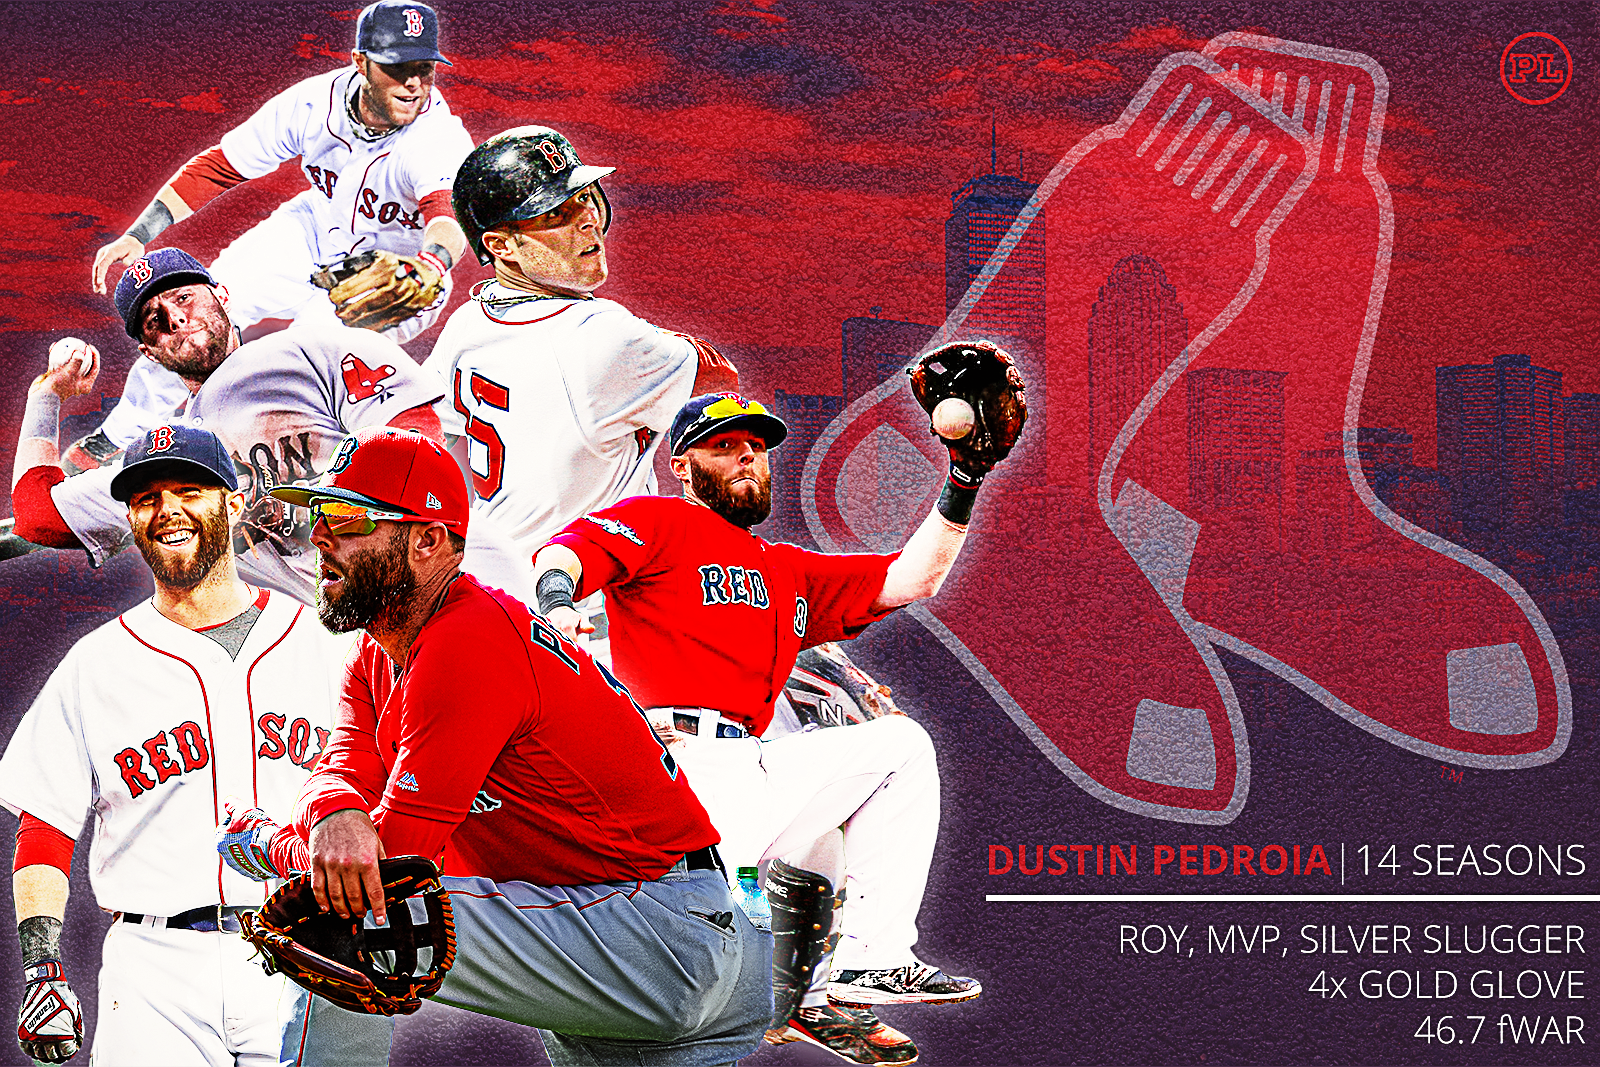 Dustin Pedroia - MLB Second base - News, Stats, Bio and more - The Athletic